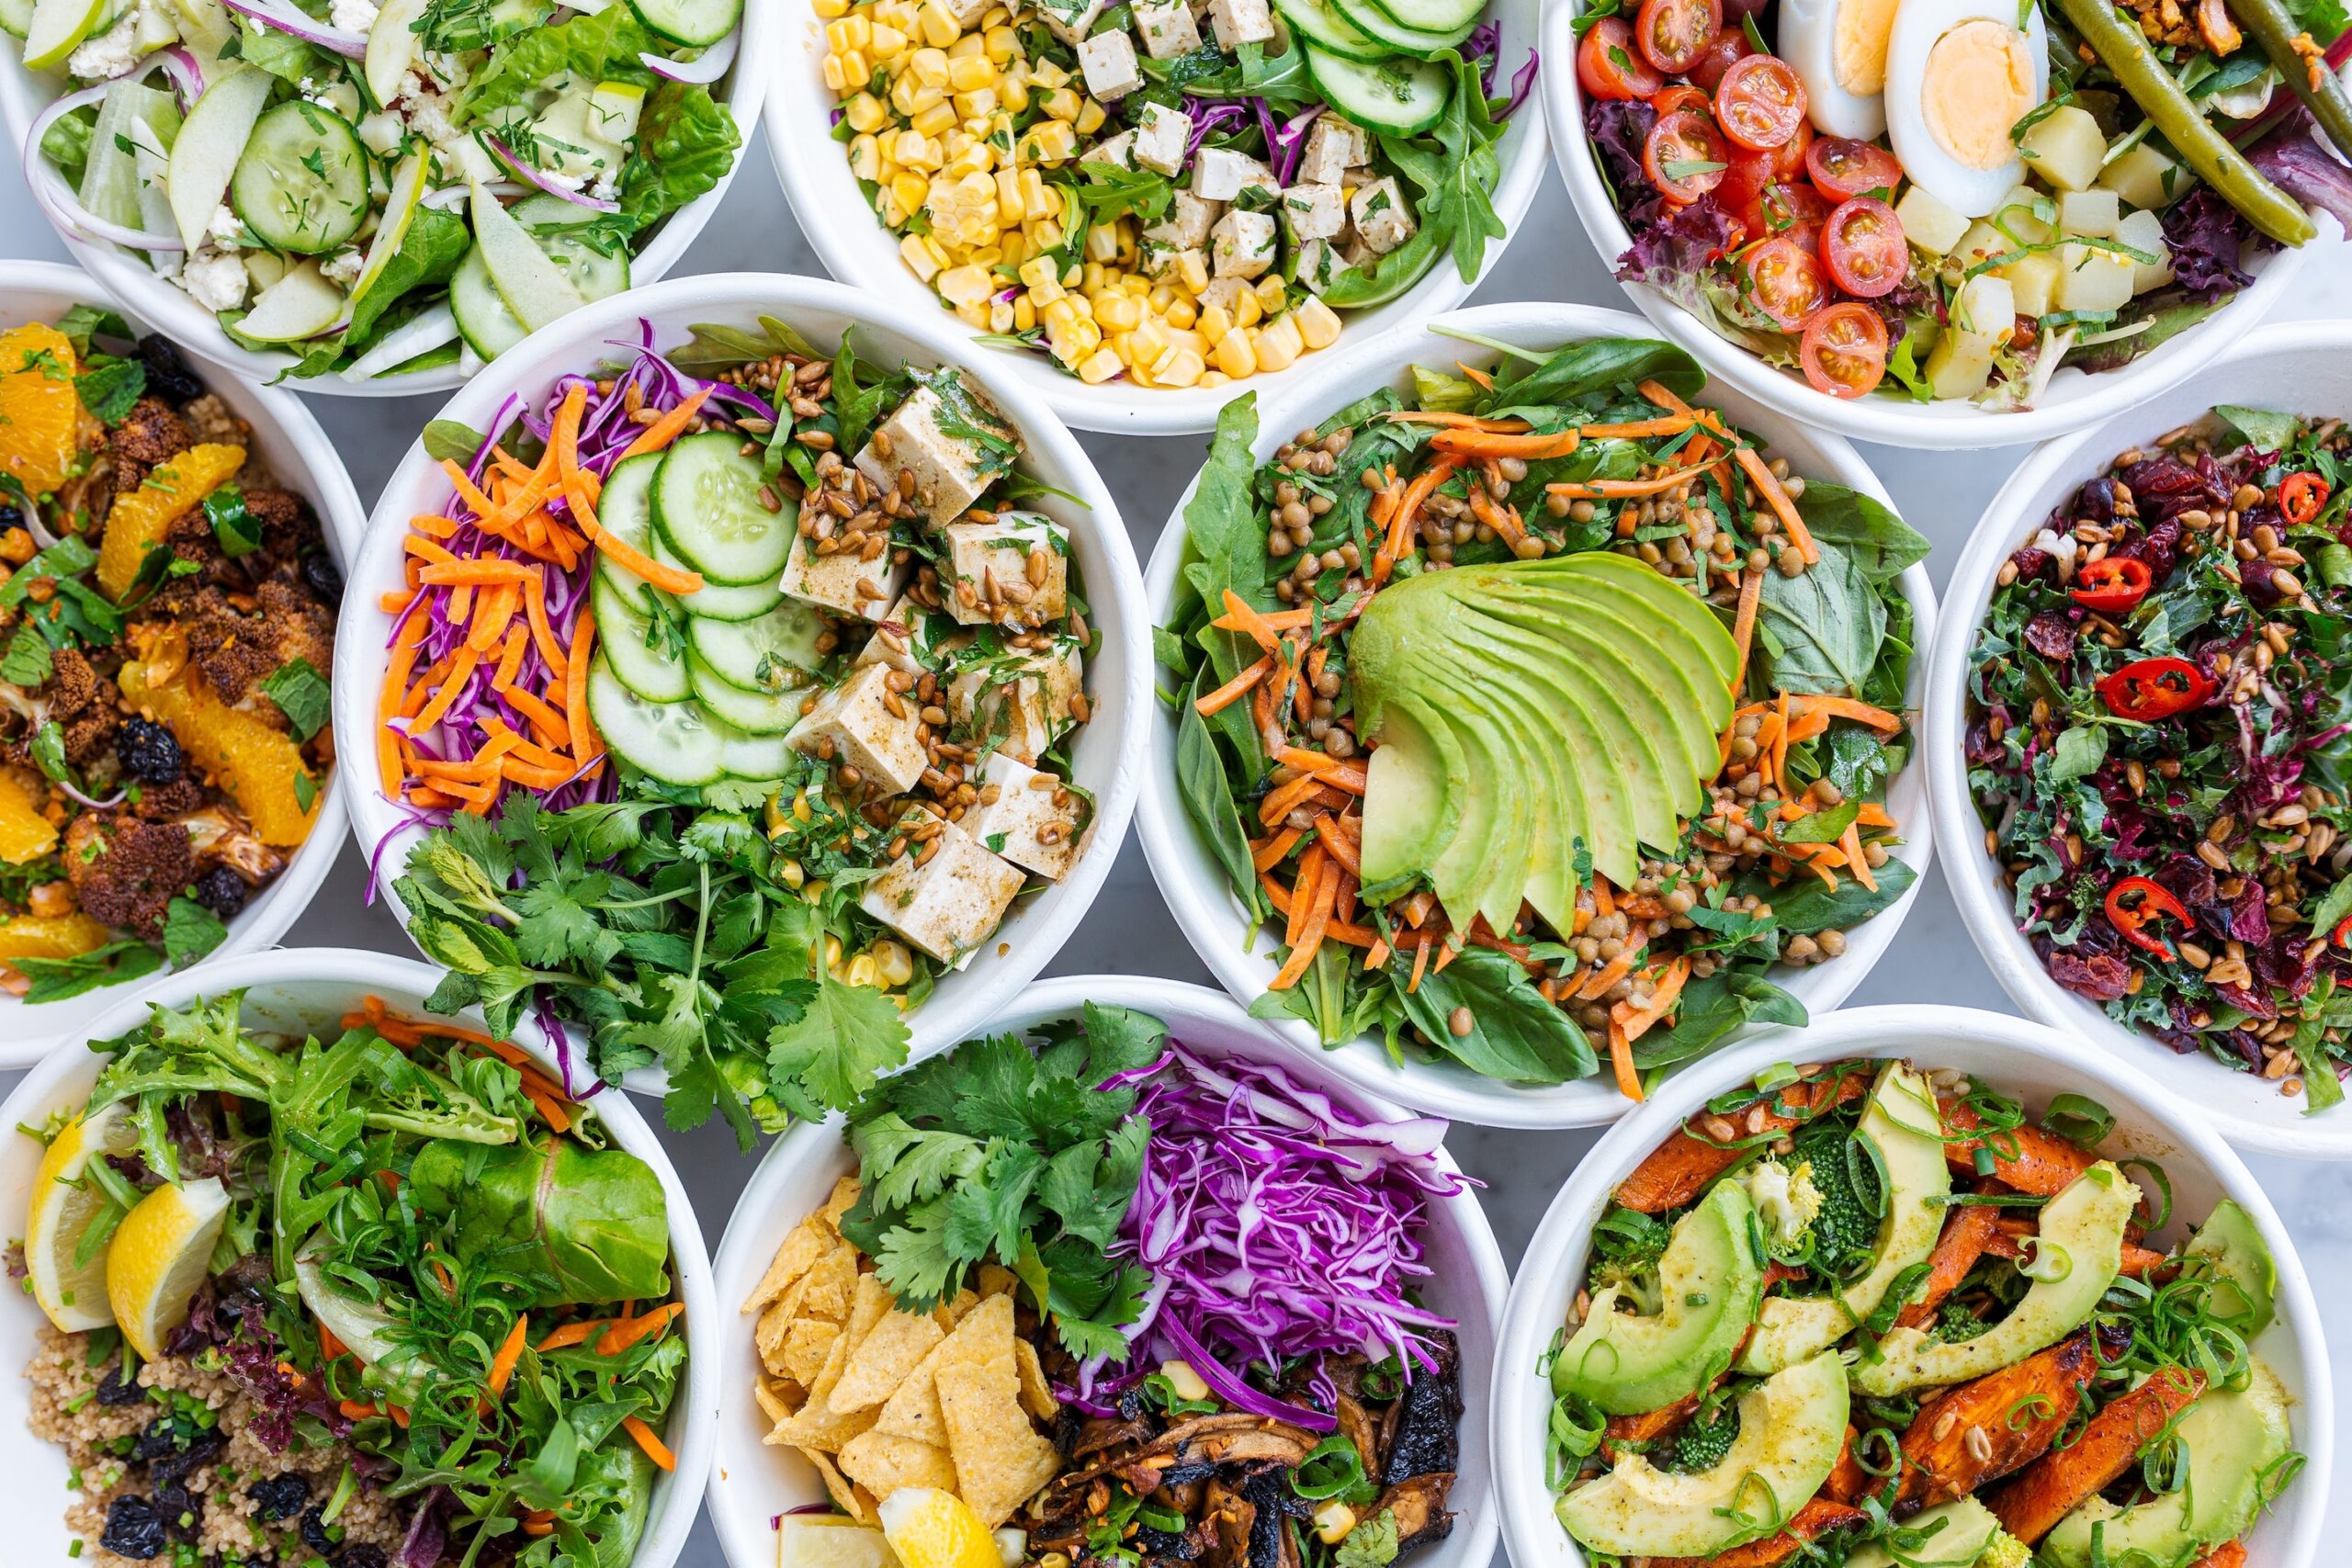 Assortment of colorful salads